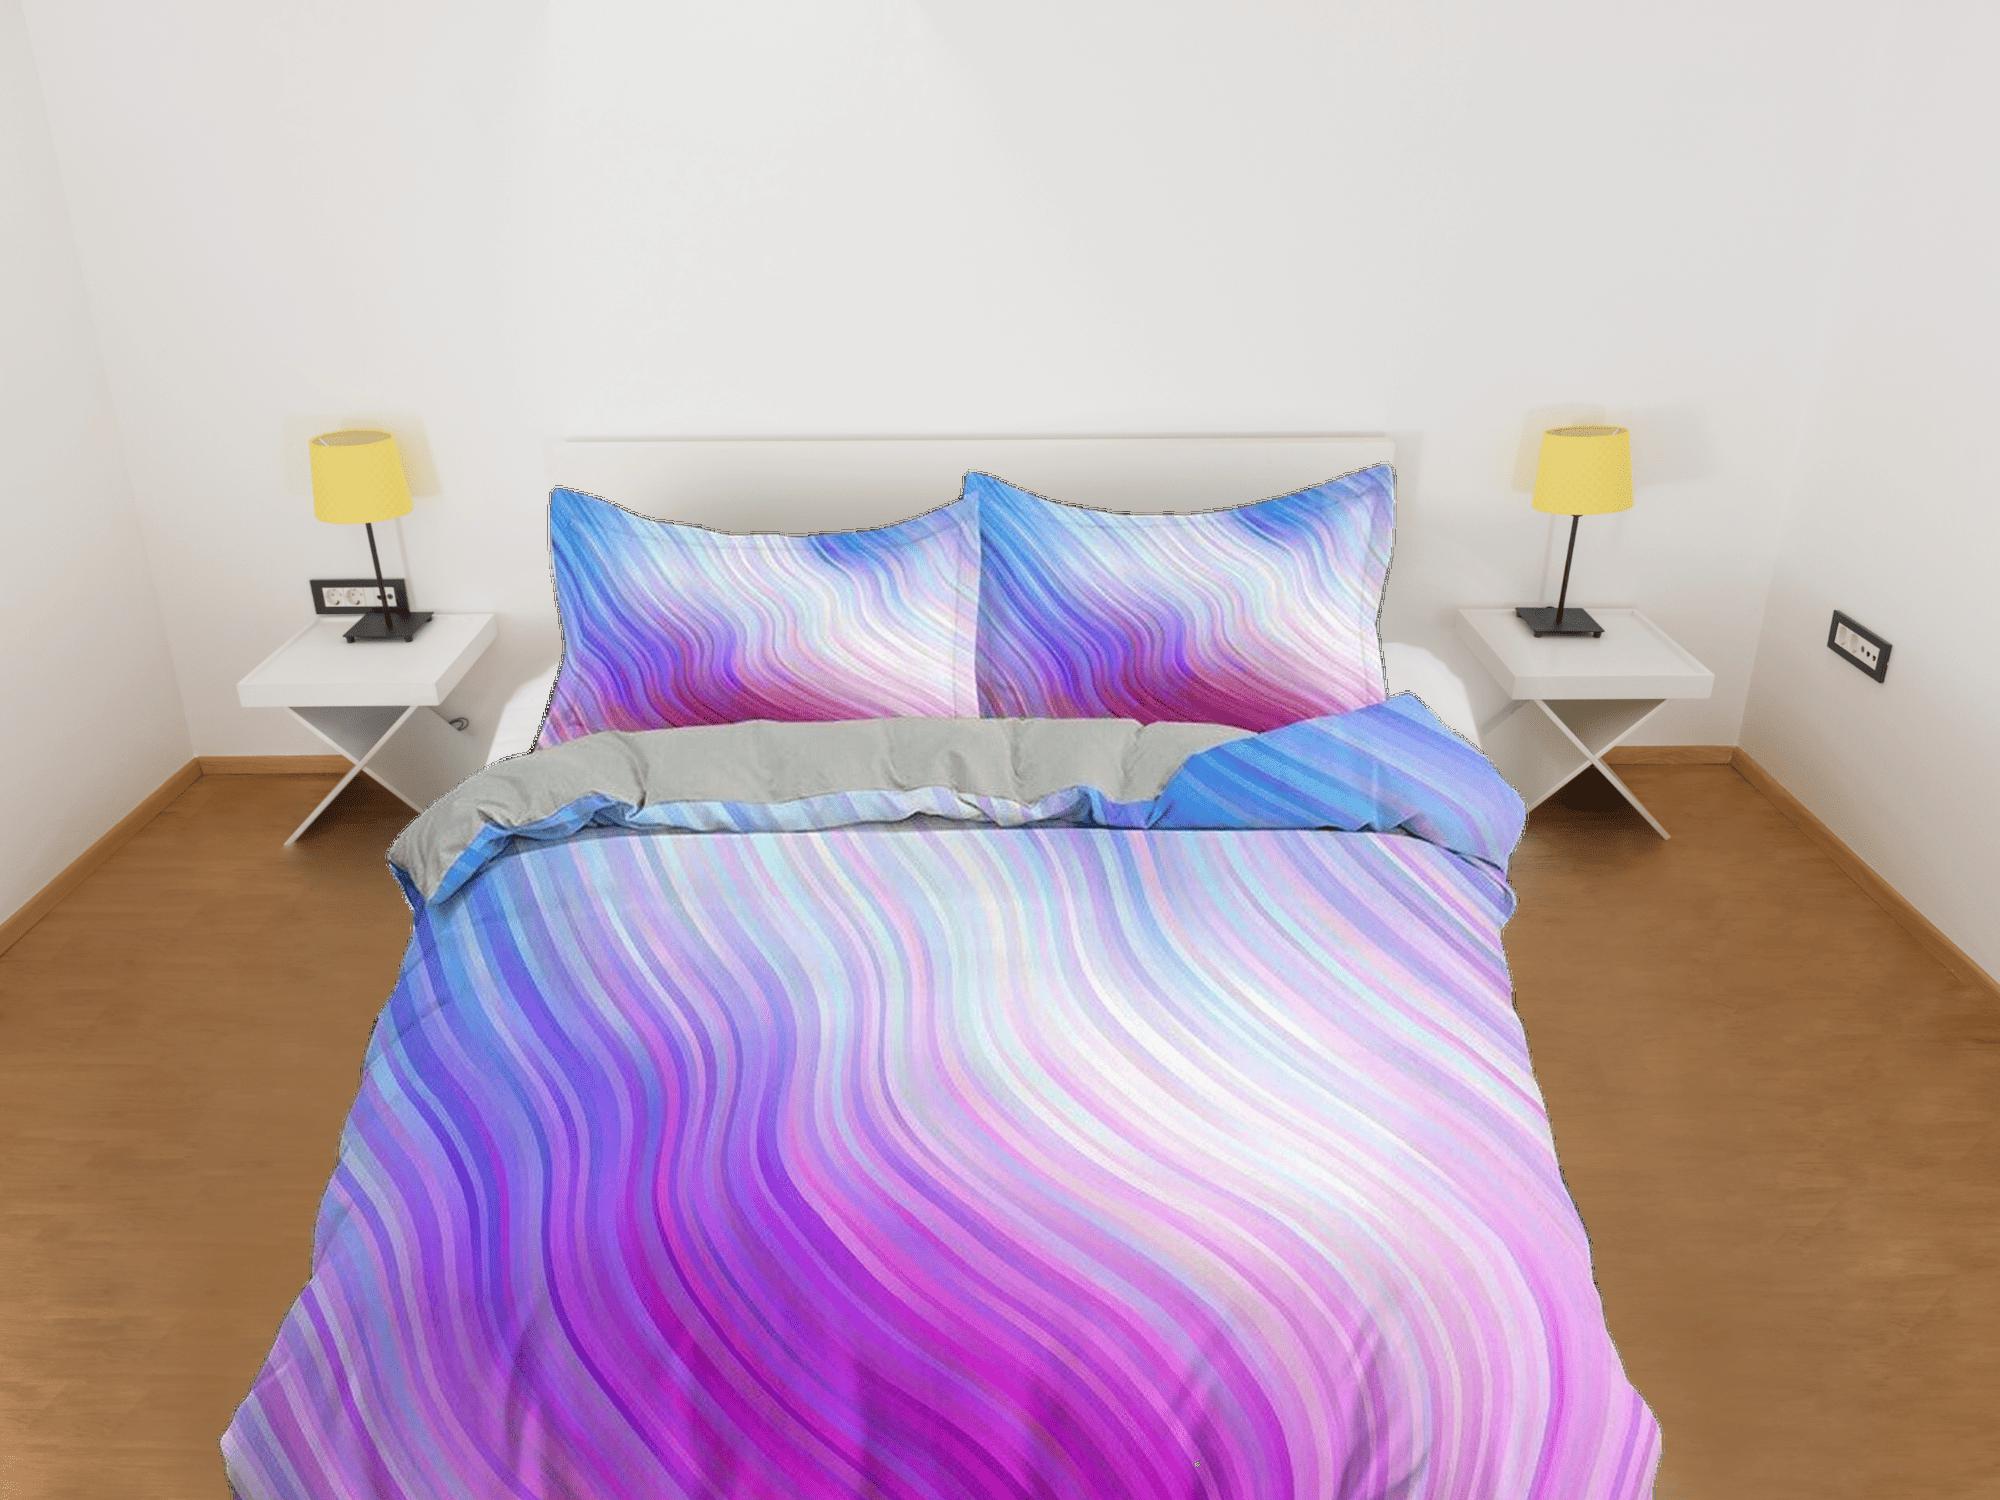 daintyduvet Contemporary bedroom set aesthetic pink purple gradient duvet cover, marble abstract art room decor boho chic bedding set full king queen